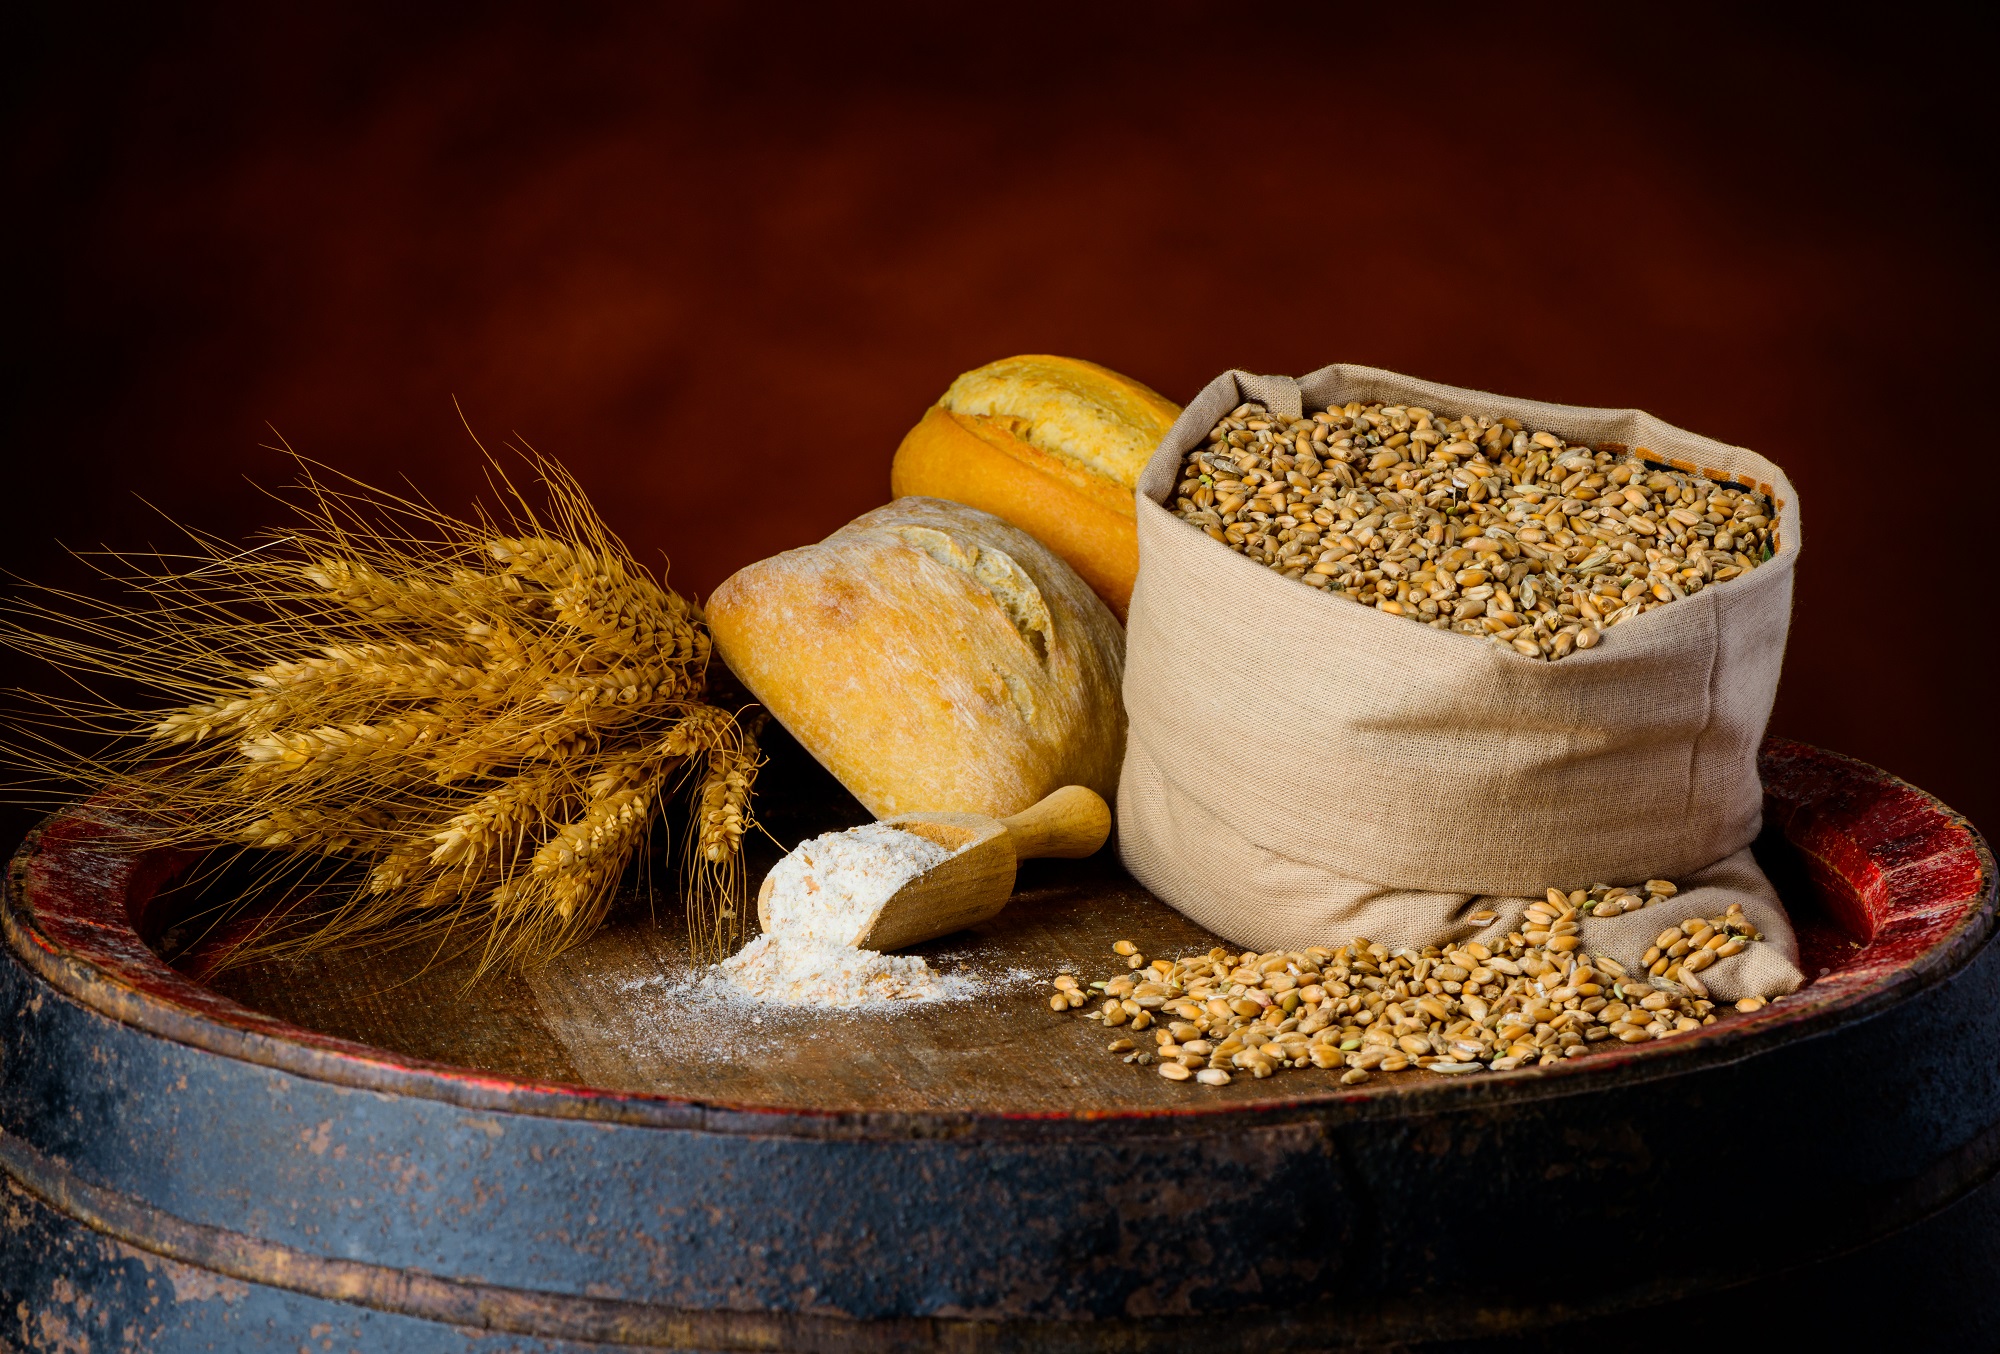 Cereal products, wheat bun, cereal-grain, flour on a wooden barrel in a rustic setup